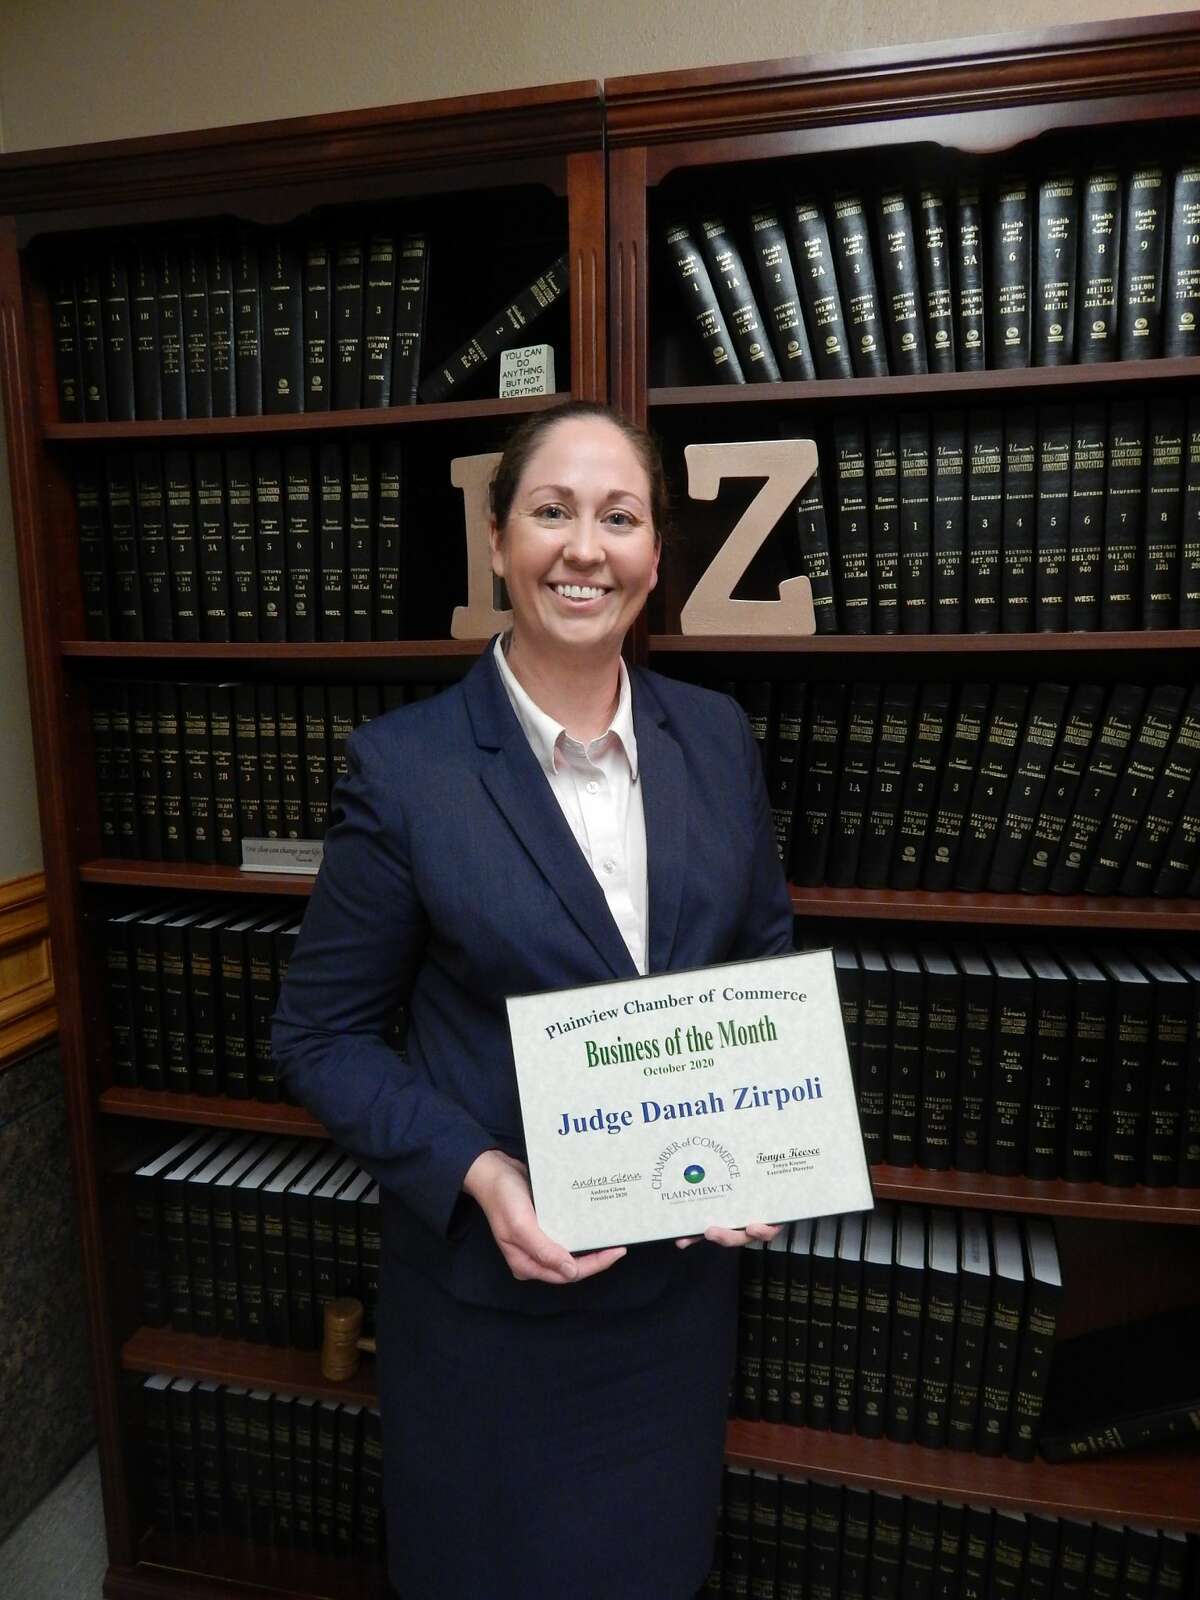 The 64th District Court, which is headed by Judge Danah Zirpoli, was chosen as the October 2020 Business of the Month by the Plainview Chamber of Commerce.